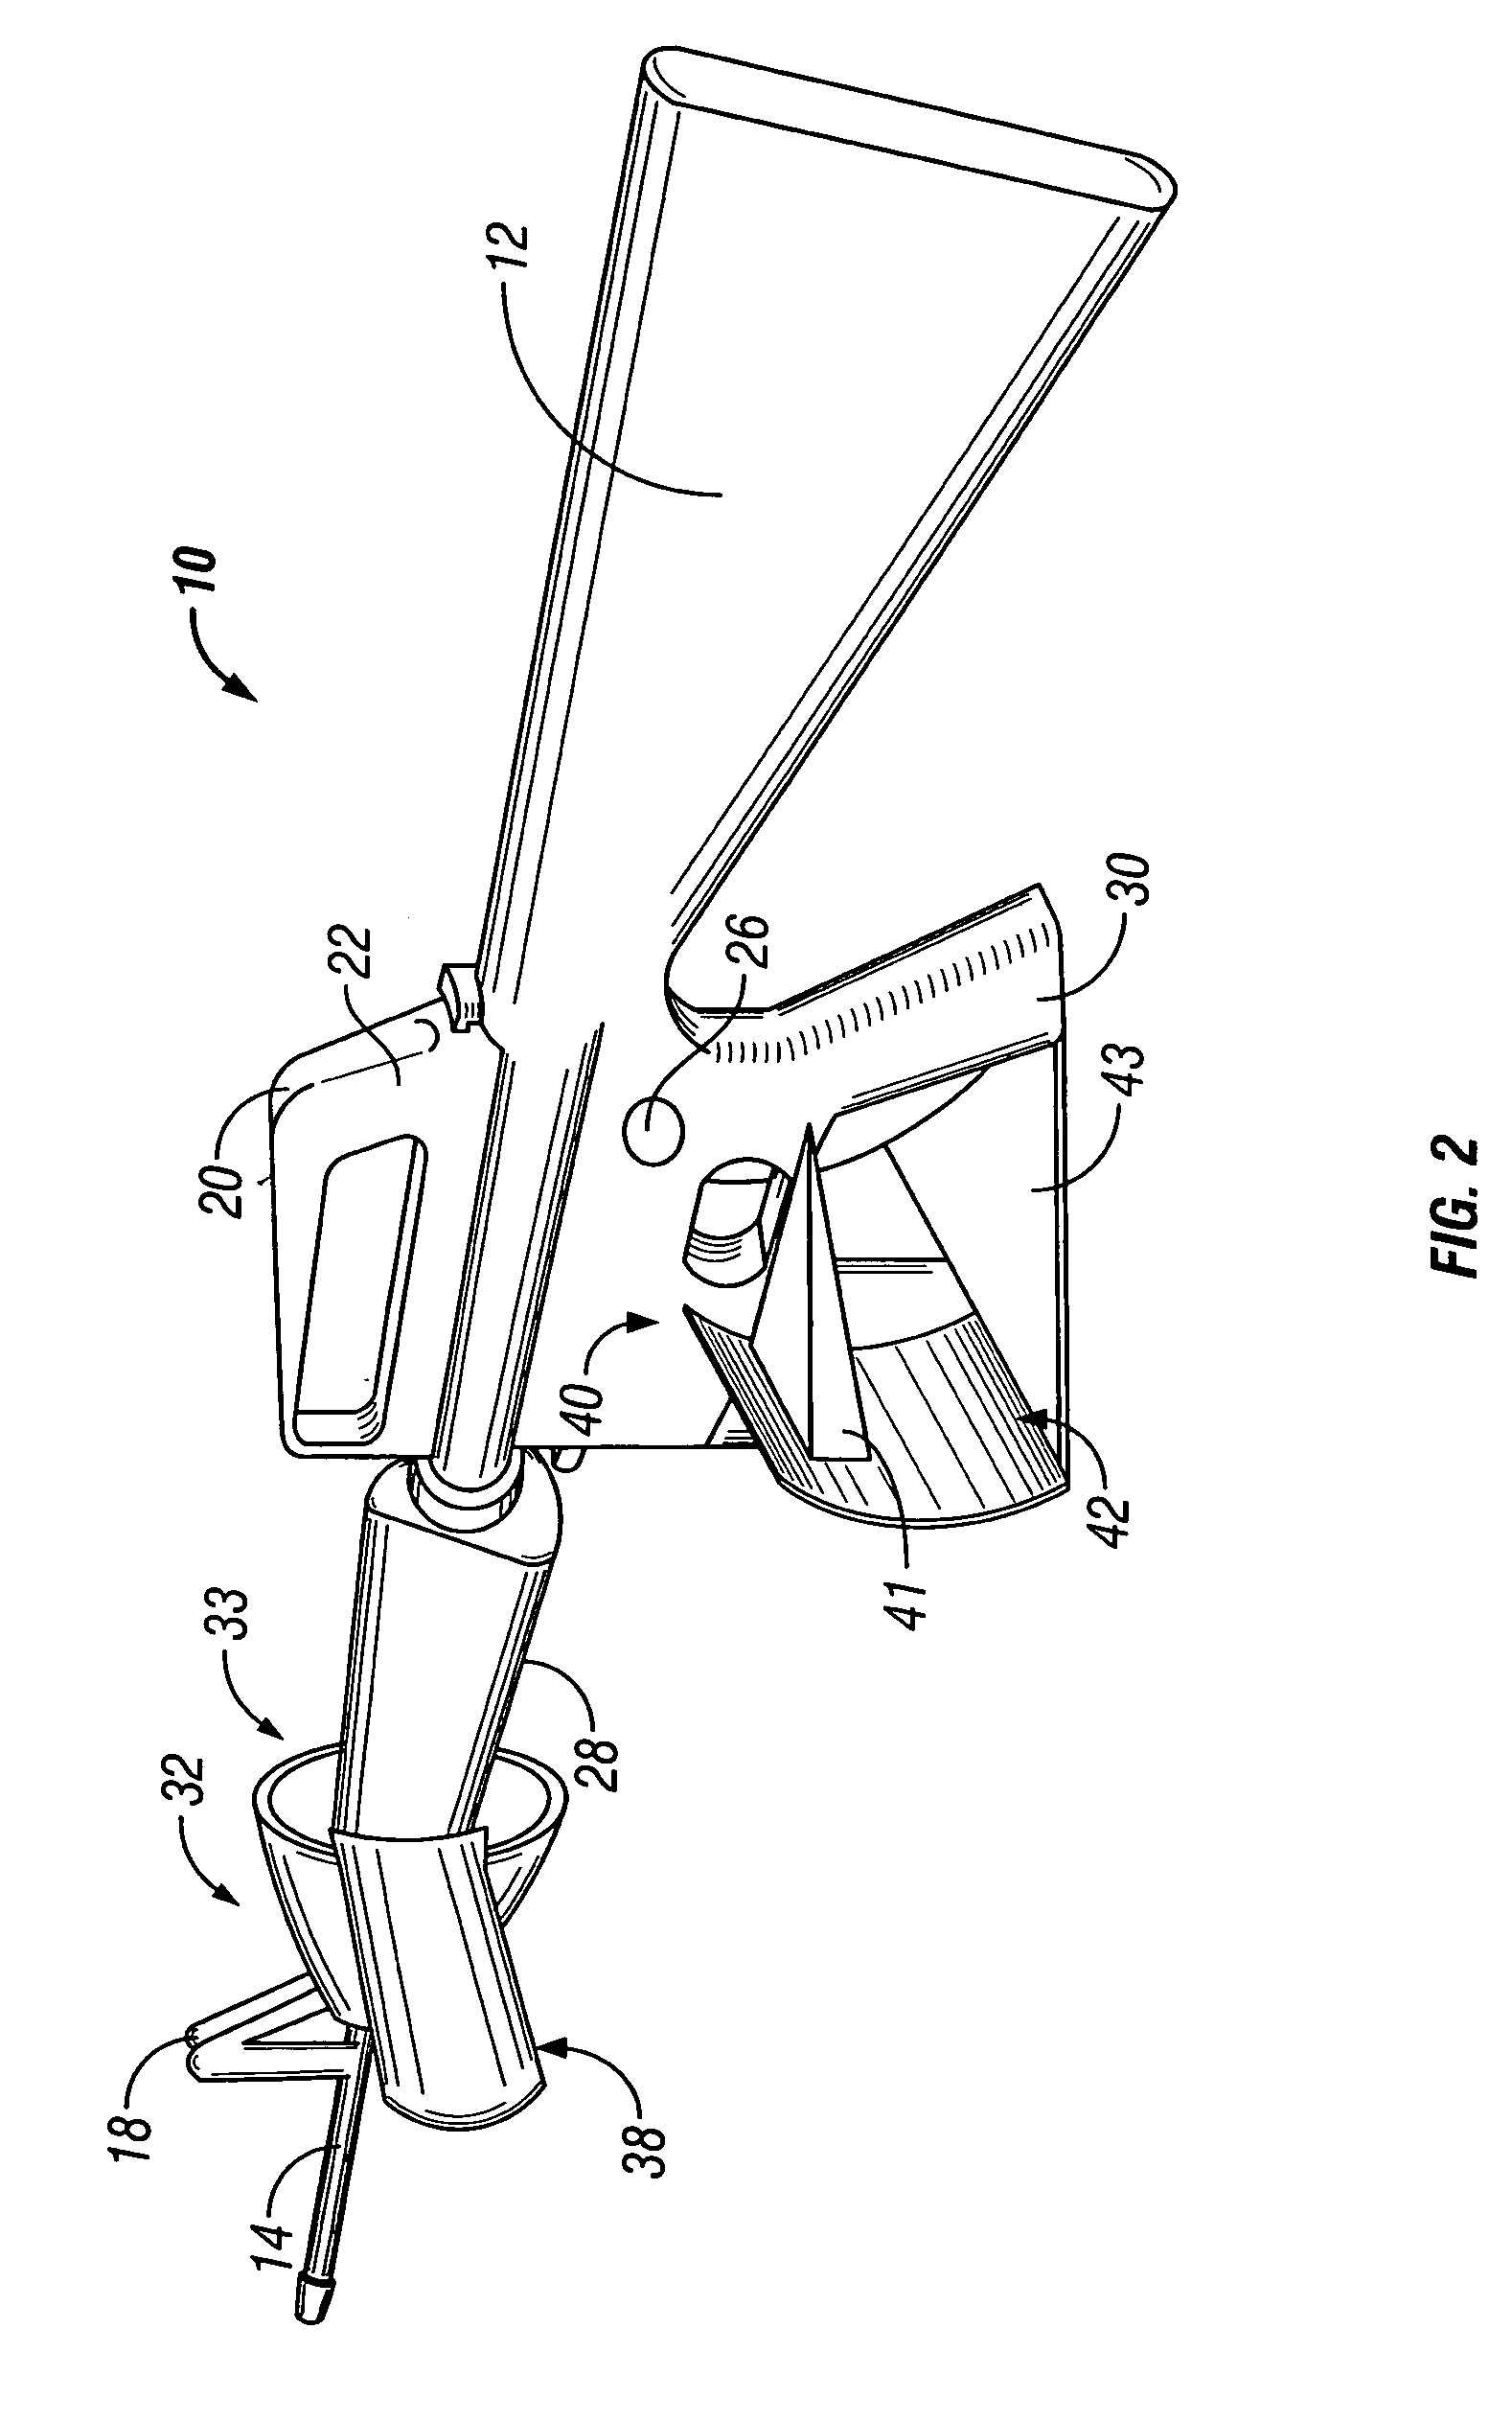 Assault rifle hand and forearm guard and method of use